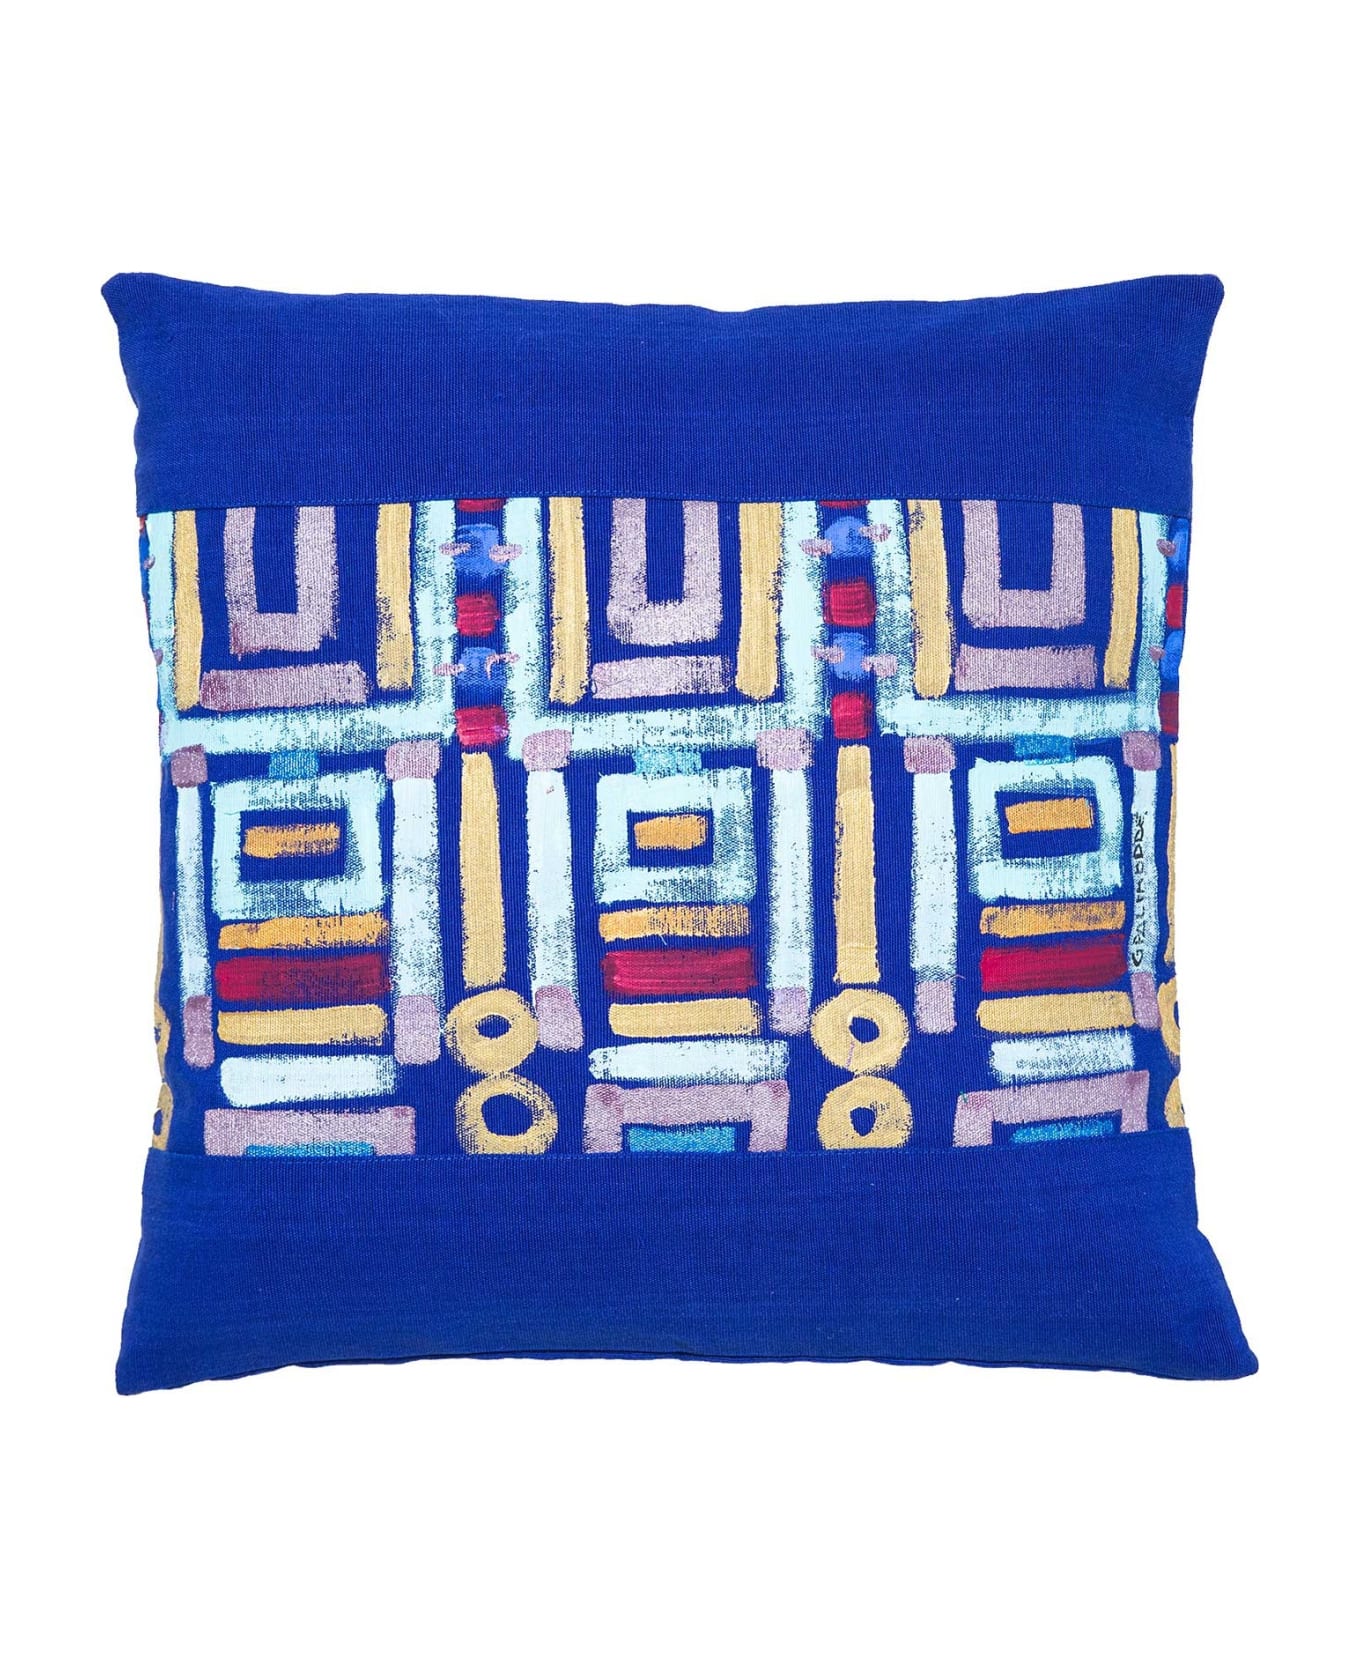 Le Botteghe su Gologone Acrylic Hand Painted Outdoor Cushion 50x50 cm - Blue Fantasy クッション